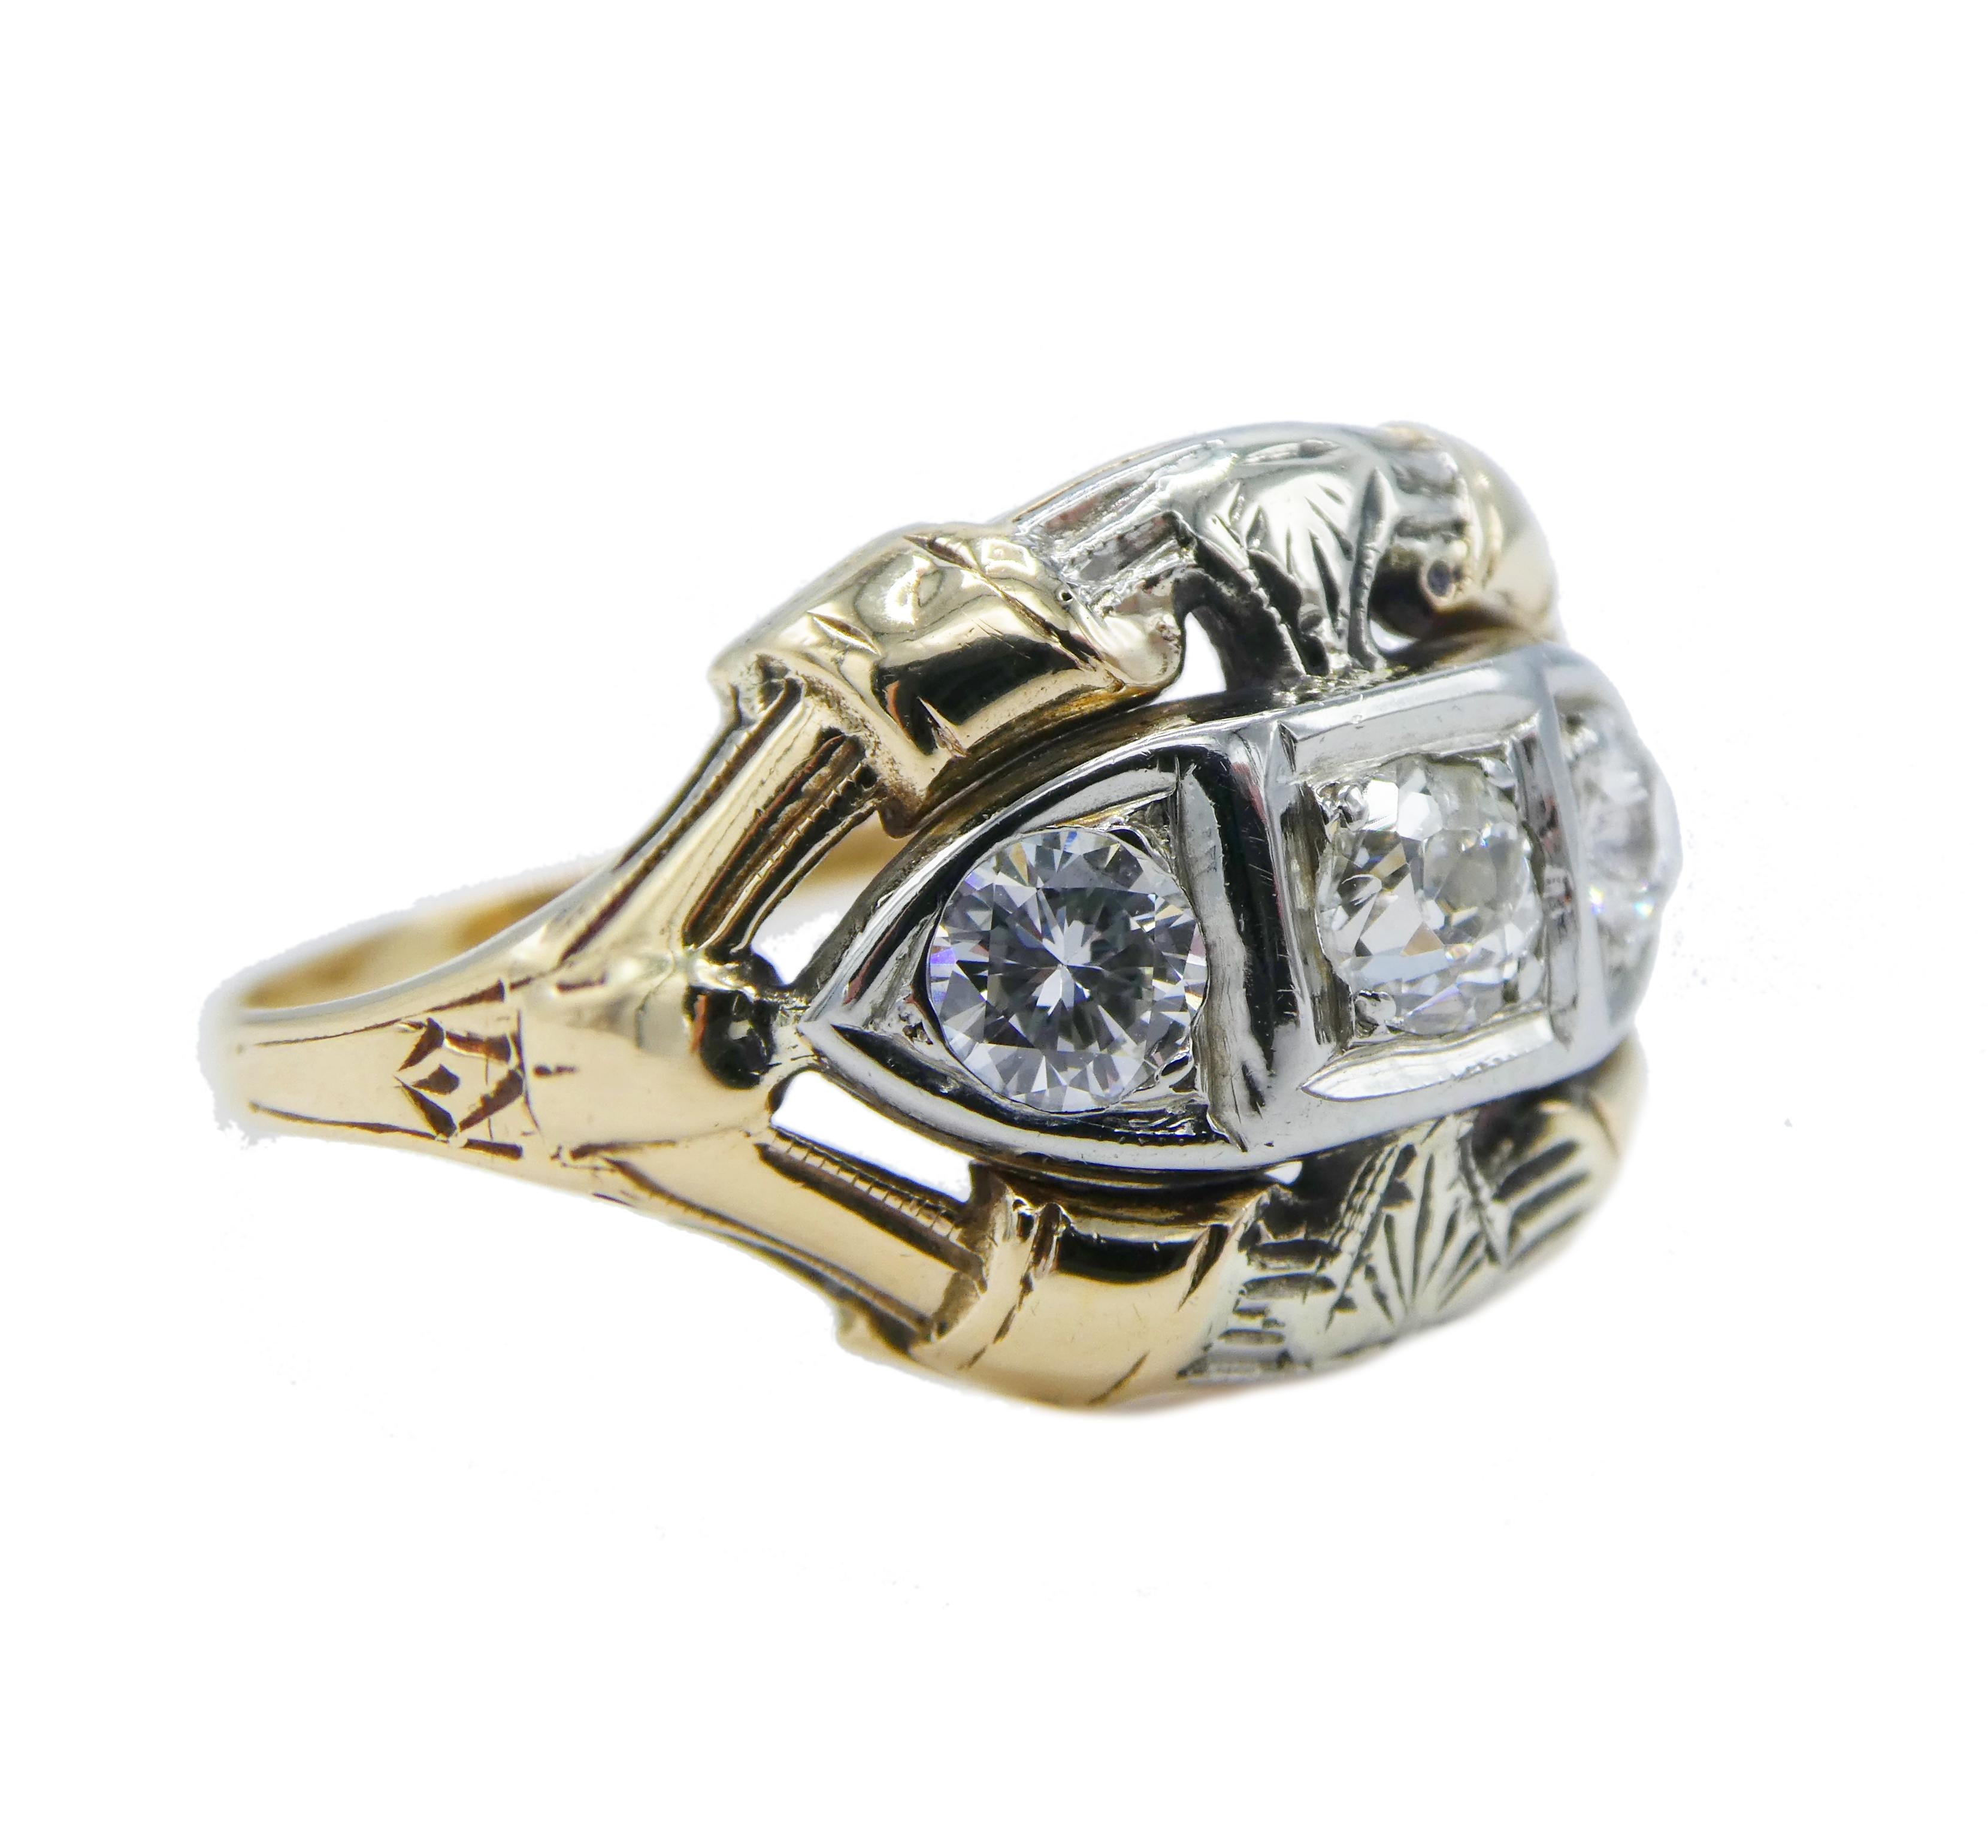 Antique Mine Cut Three Stone Diamond Ring Size 6.5 

Metal: 14k Gold Two-Tone Yellow and White
Diamonds: Old Mine Cut Round Diamonds 0.30 CTW approx G-H SI
Finger Size: 6.5 (6 1/2)
Dimensions: 11.9mm thick at top and 1.45mm at base of